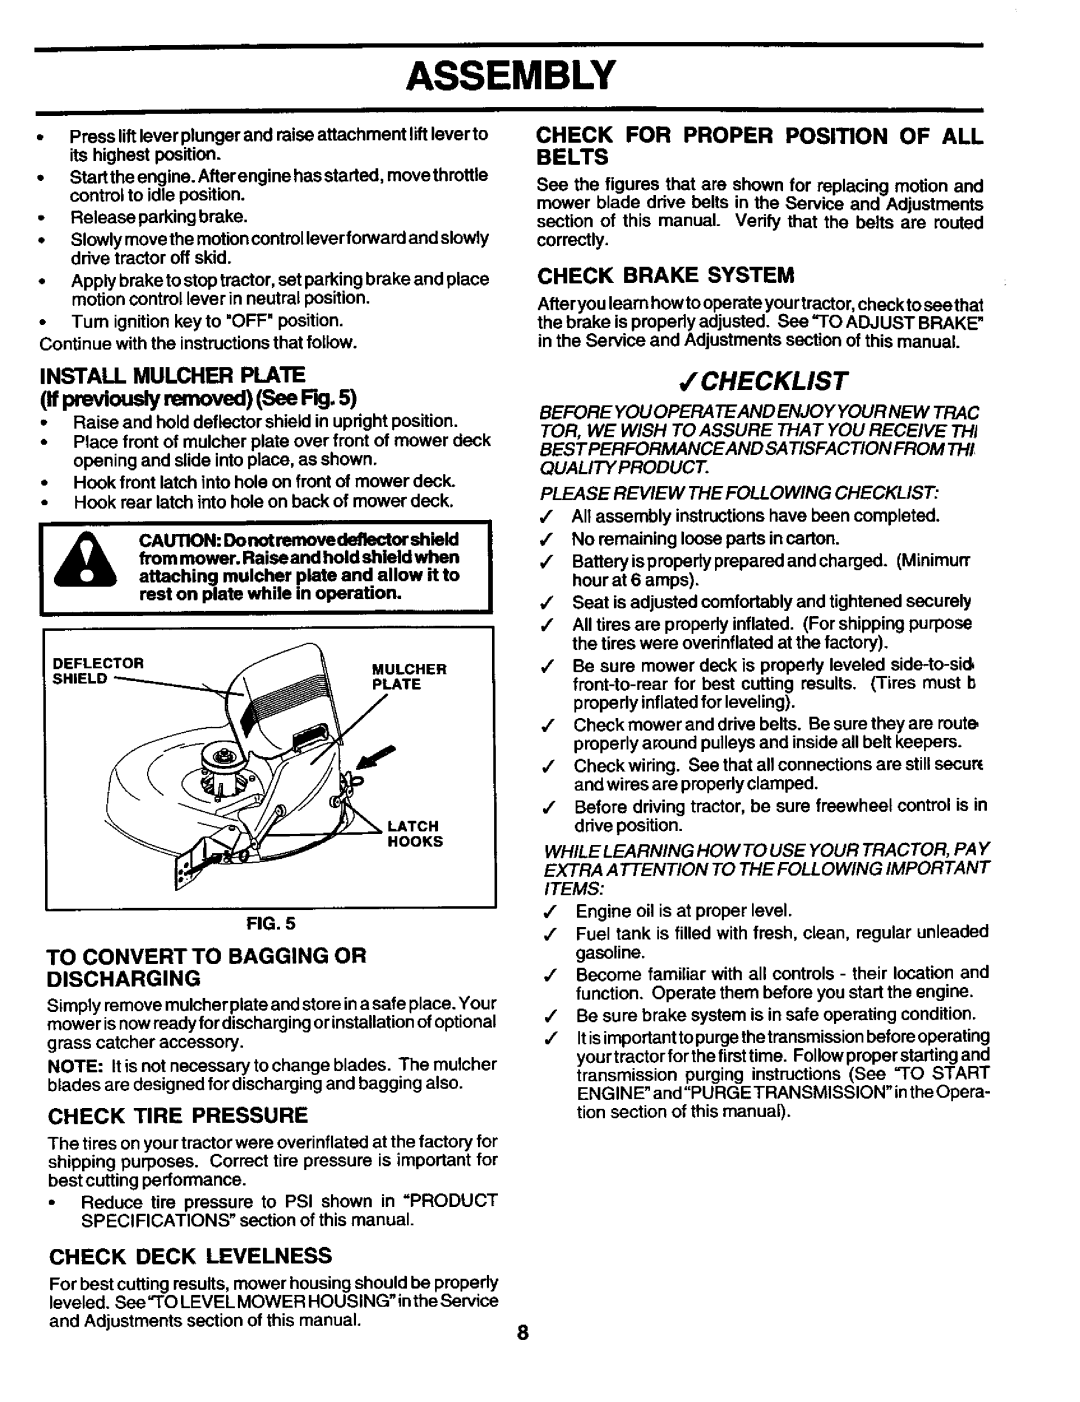 Craftsman 944.602951 owner manual OfpreWou. yremovedSeeF j, Assembly, Checklist, Install Mulchefi Plate, Quality Product 